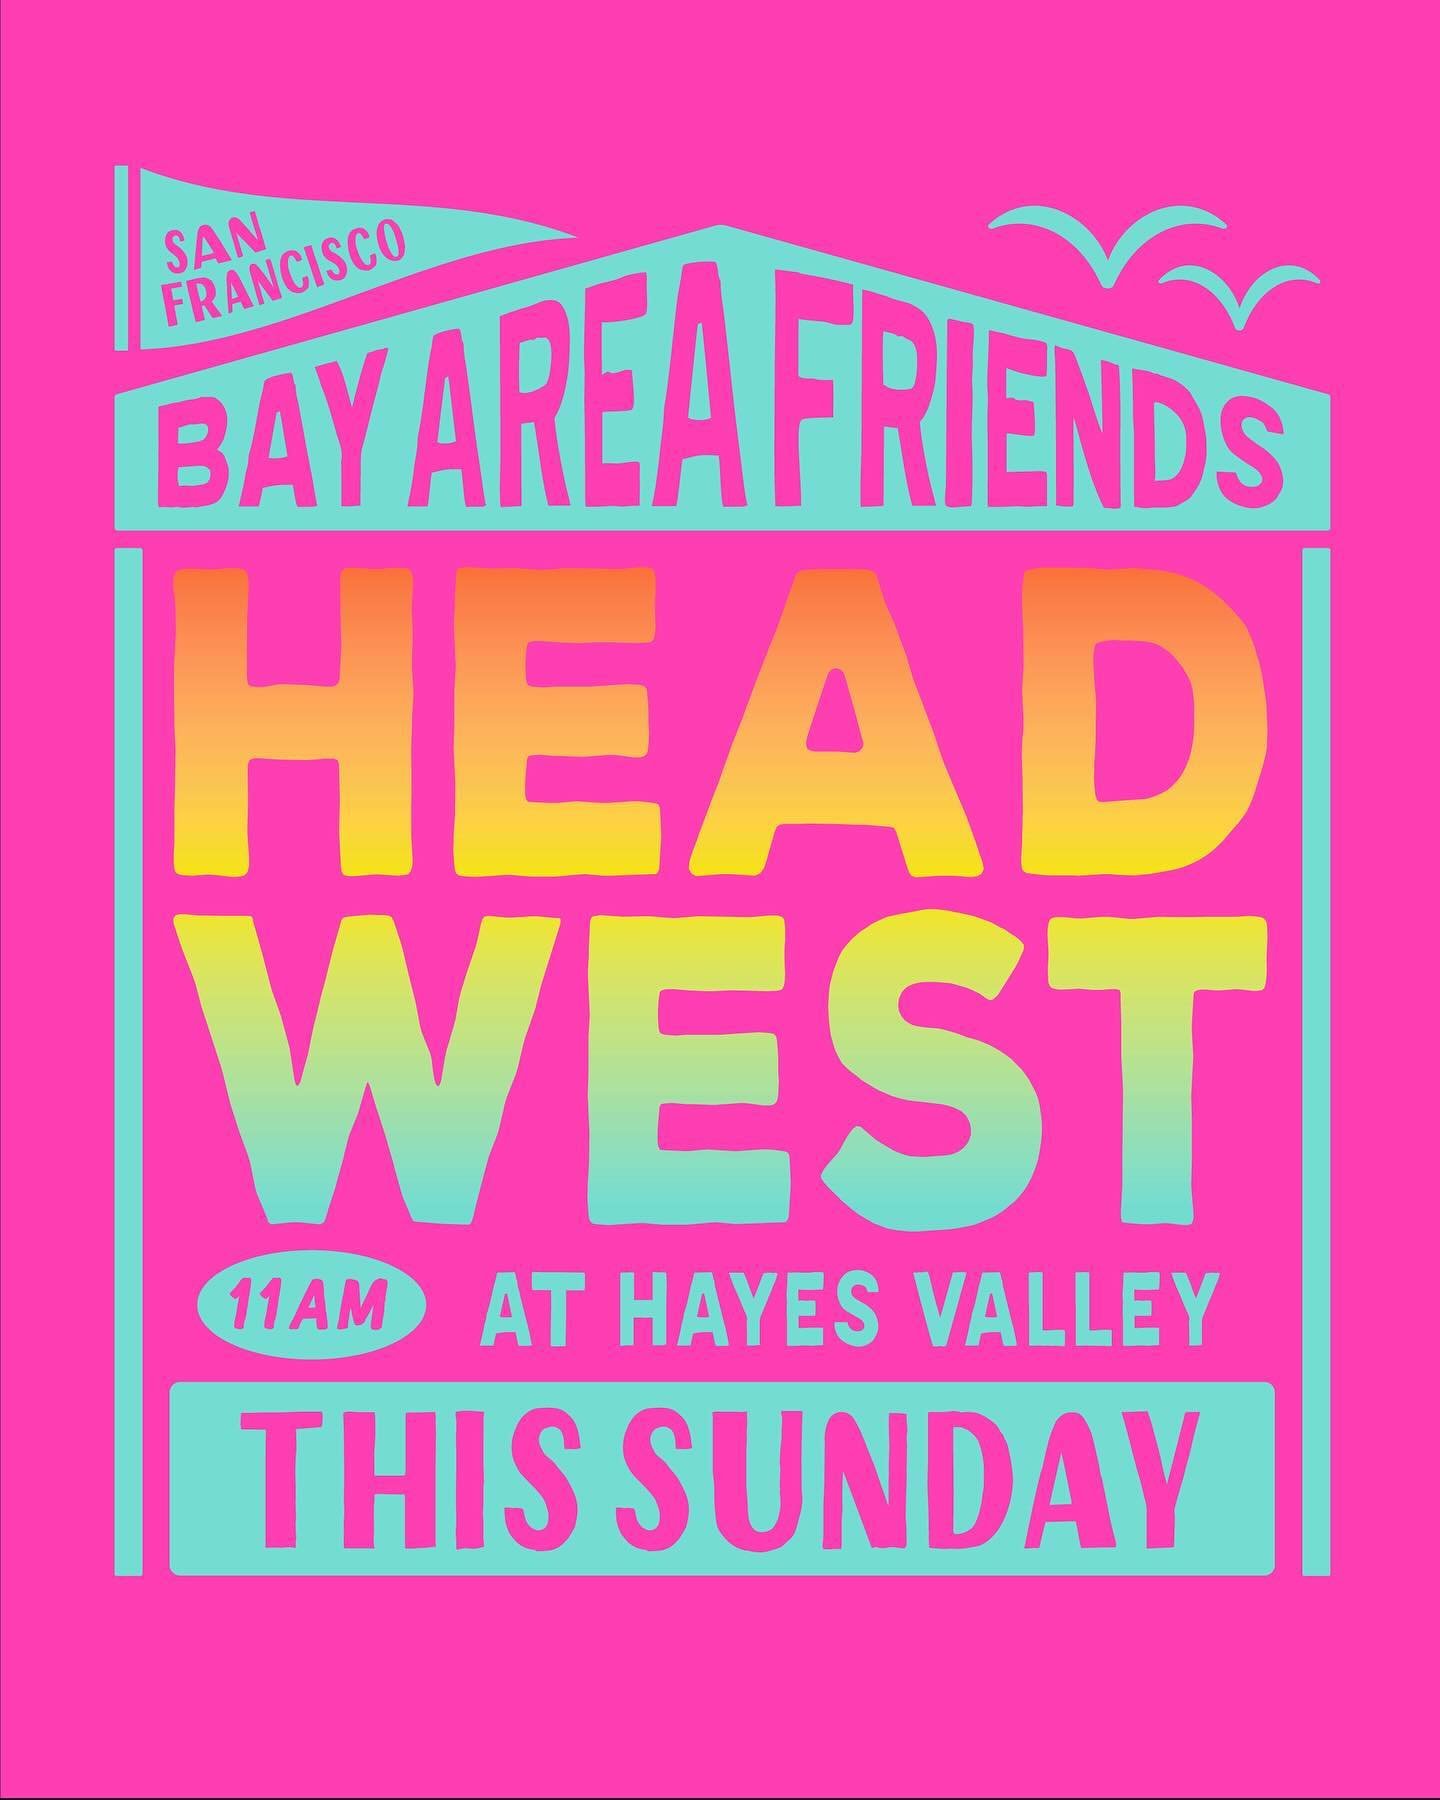 ✨HEAD WEST TOMORROW 🌞
.
We&rsquo;re so excited for the return of HEAD WEST in Hayes Valley, SF @explorehayesvalley ☀️🌳| TOMORROW - Sunday, April 14th from 11a - 5p ✨
.
Find us in the heart of Hayes Valley, along our NEW expanded Marketplace layout 